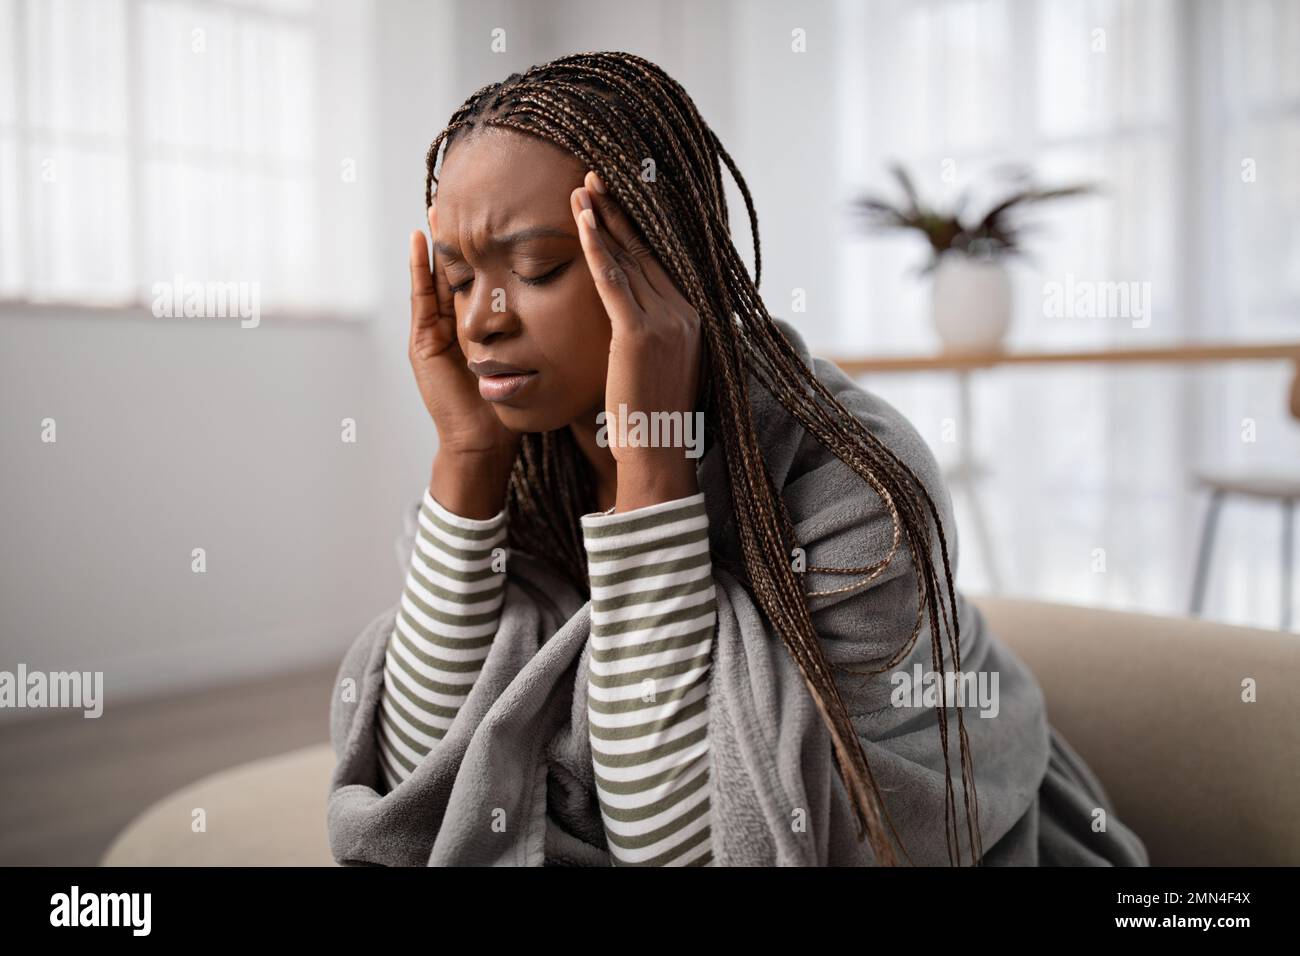 Tired young black woman suffering from headache, home interior Stock Photo